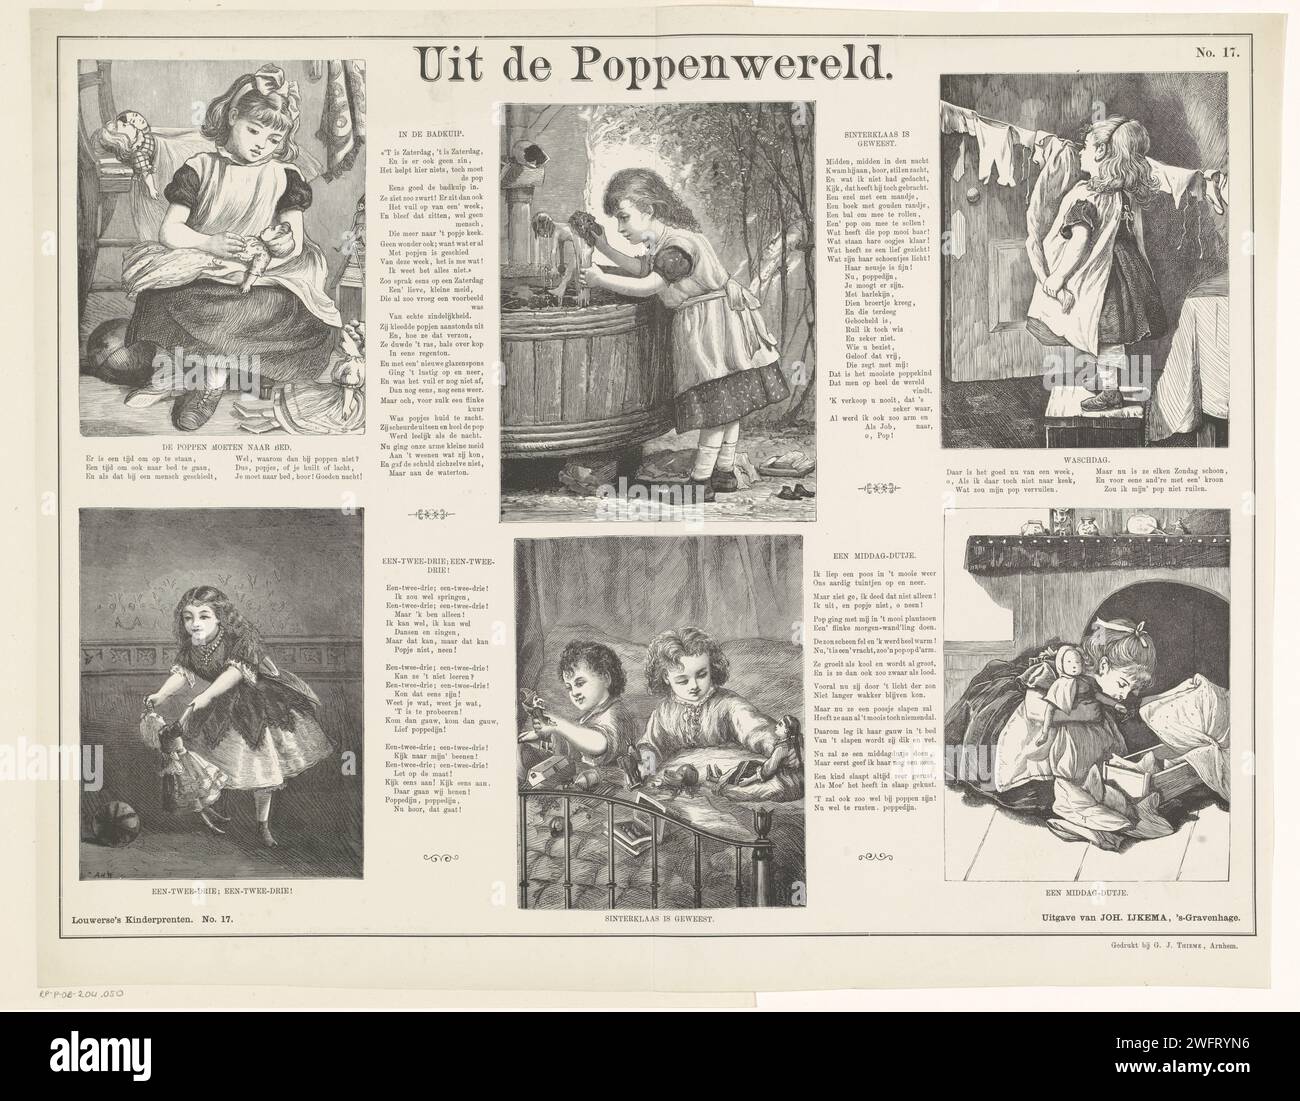 From the Poppenwereld, 1882 - 1905 print Leaf with 6 performances of girls playing with dolls. Between the images verses in book print. Numbered at the top right and bottom left: No. 17. Publisher: The BEPRITER: Arngem paper printing block / letterpress printing children's games and plays. (playing with) dolls Stock Photo